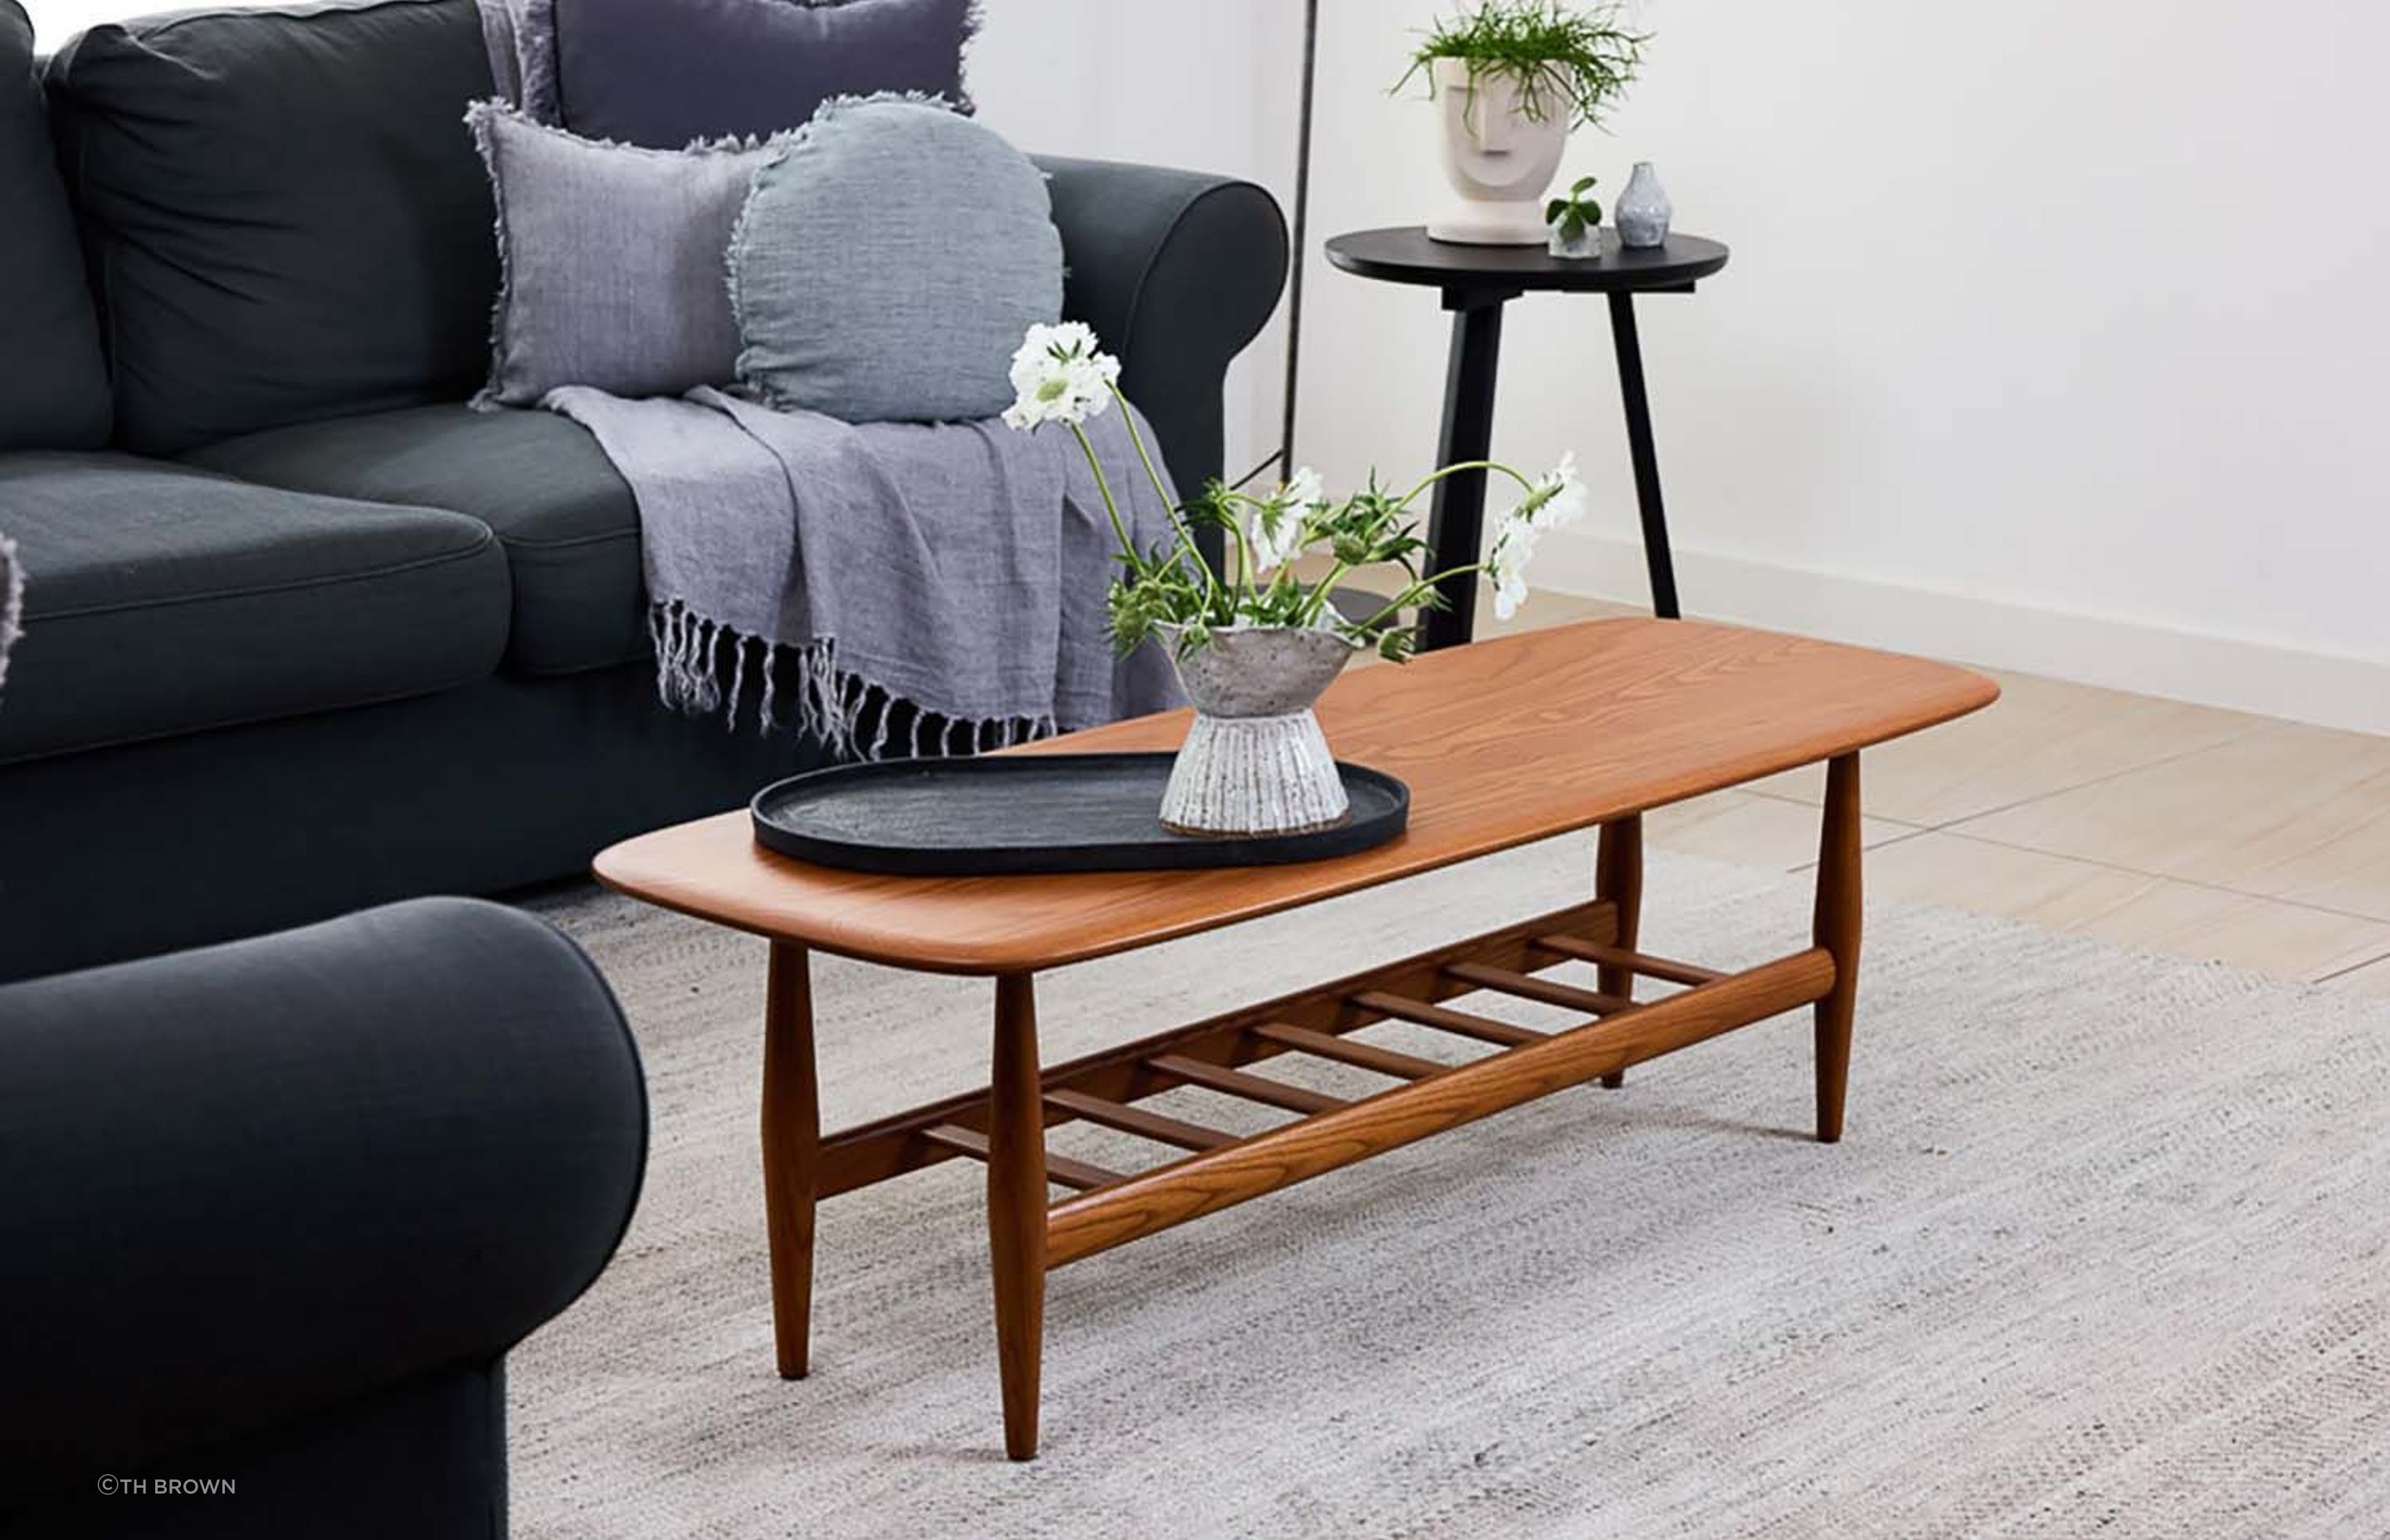 This solid dark ash coffee table boasts a convenient, functional magazine rack. Featured product: Frisco Coffee Table.